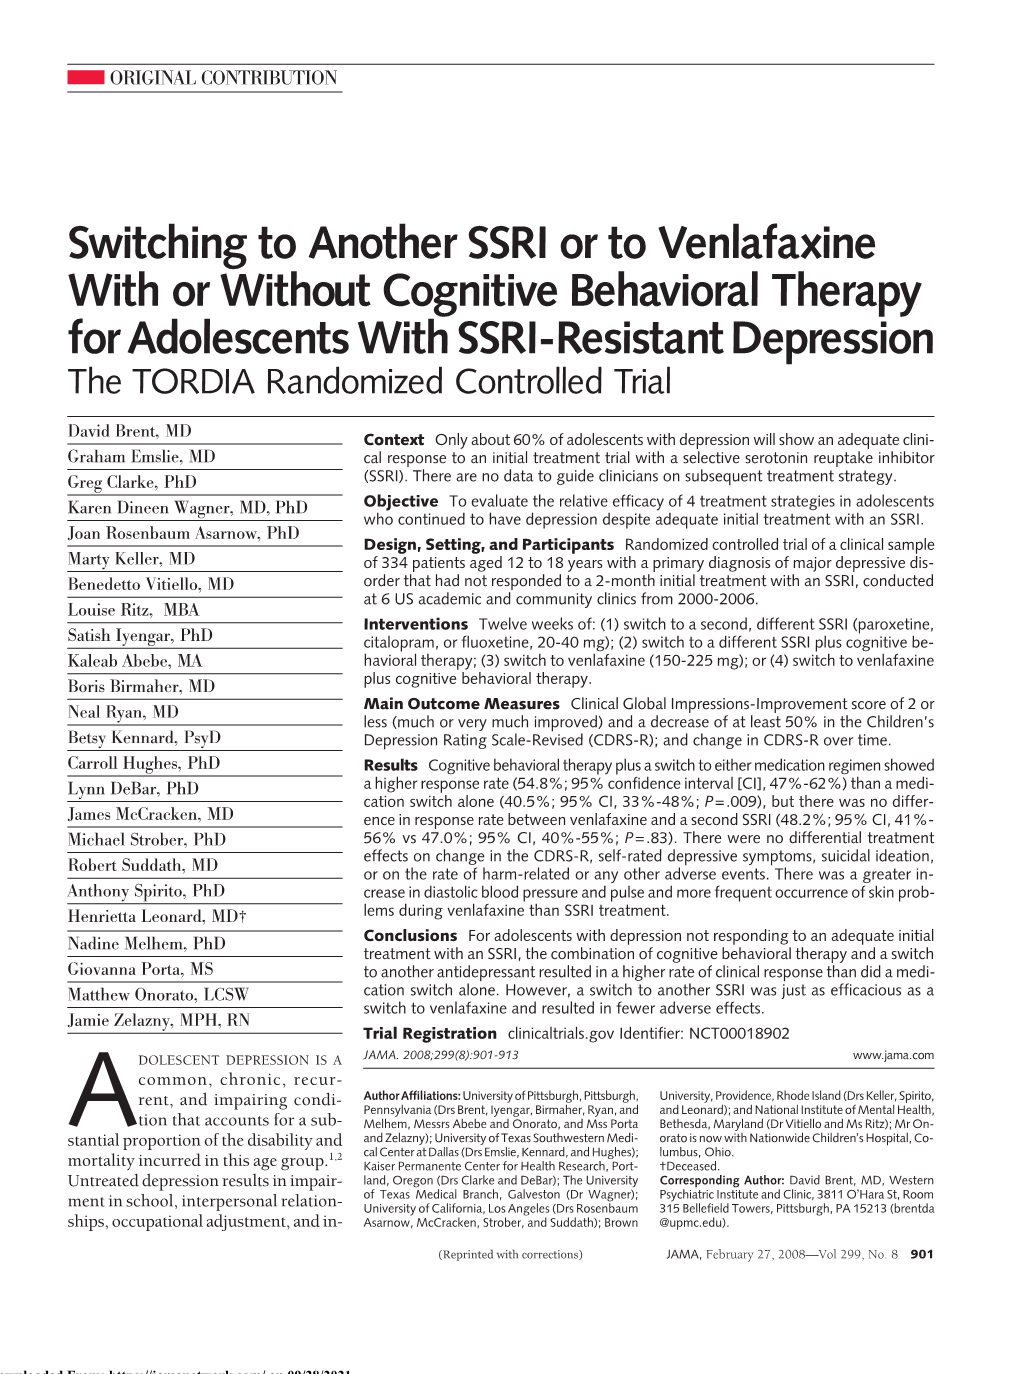 Switching to Another SSRI Or to Venlafaxine With